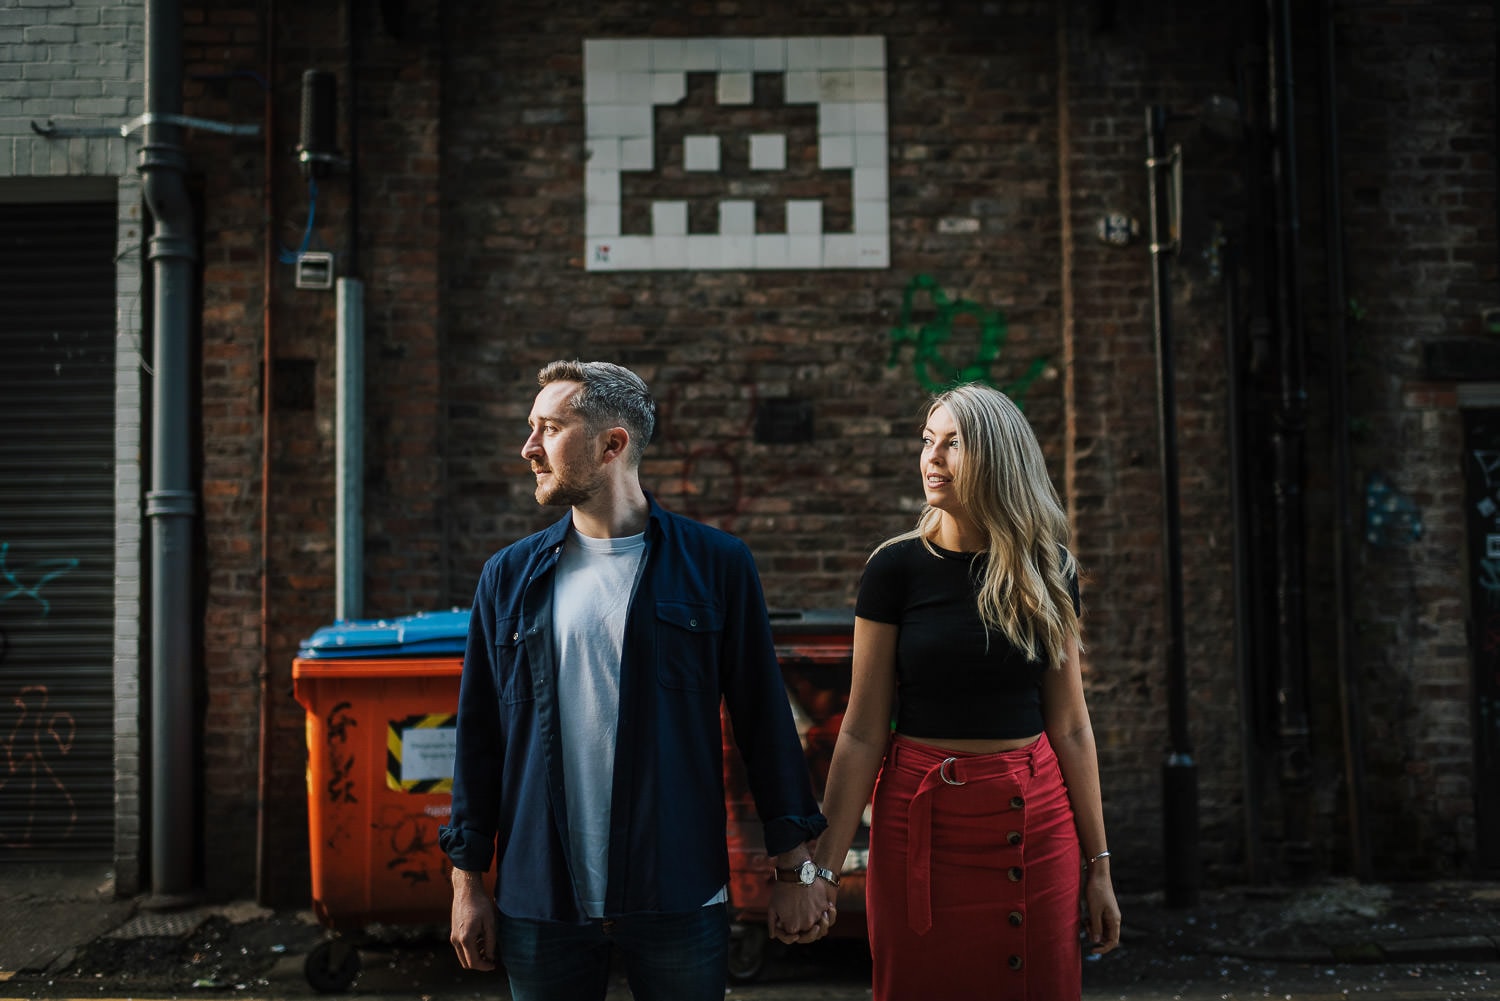 A couple holding hands in front of a space invaders tile mural